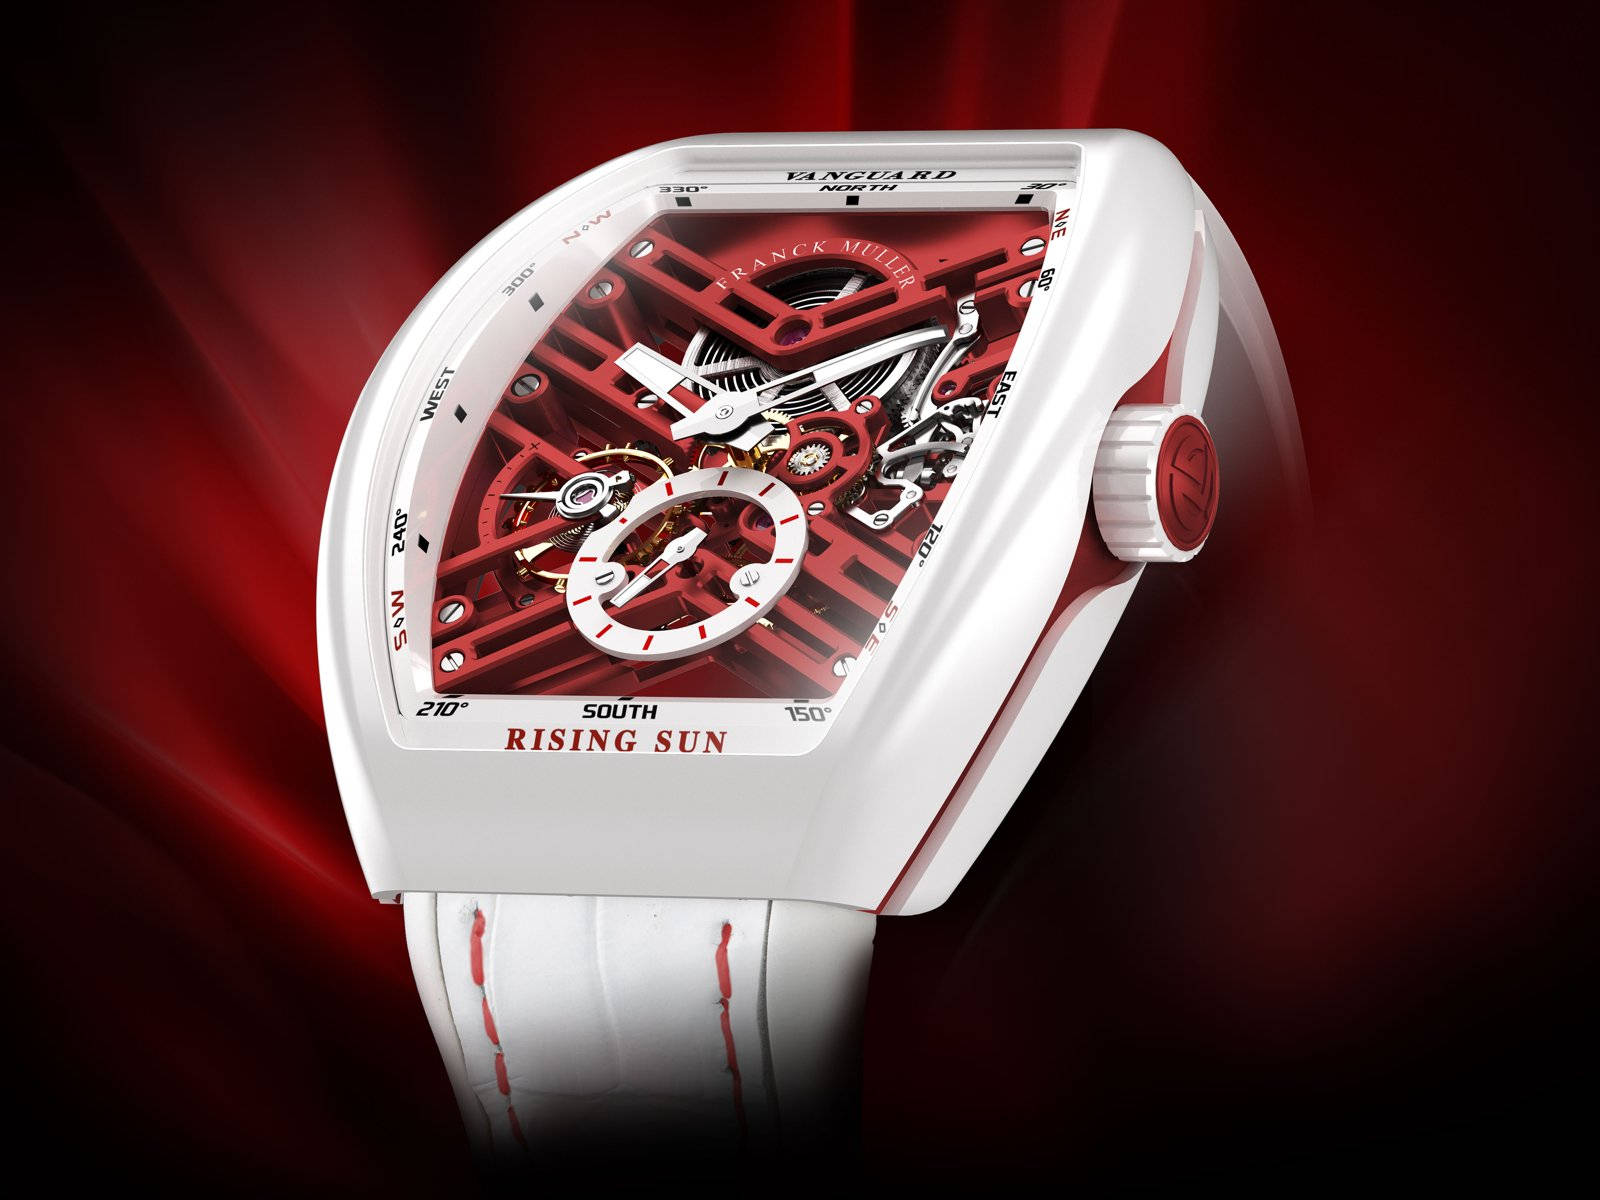 The Rising Sun Luxury Timepiece by Franck Muller Wallpaper